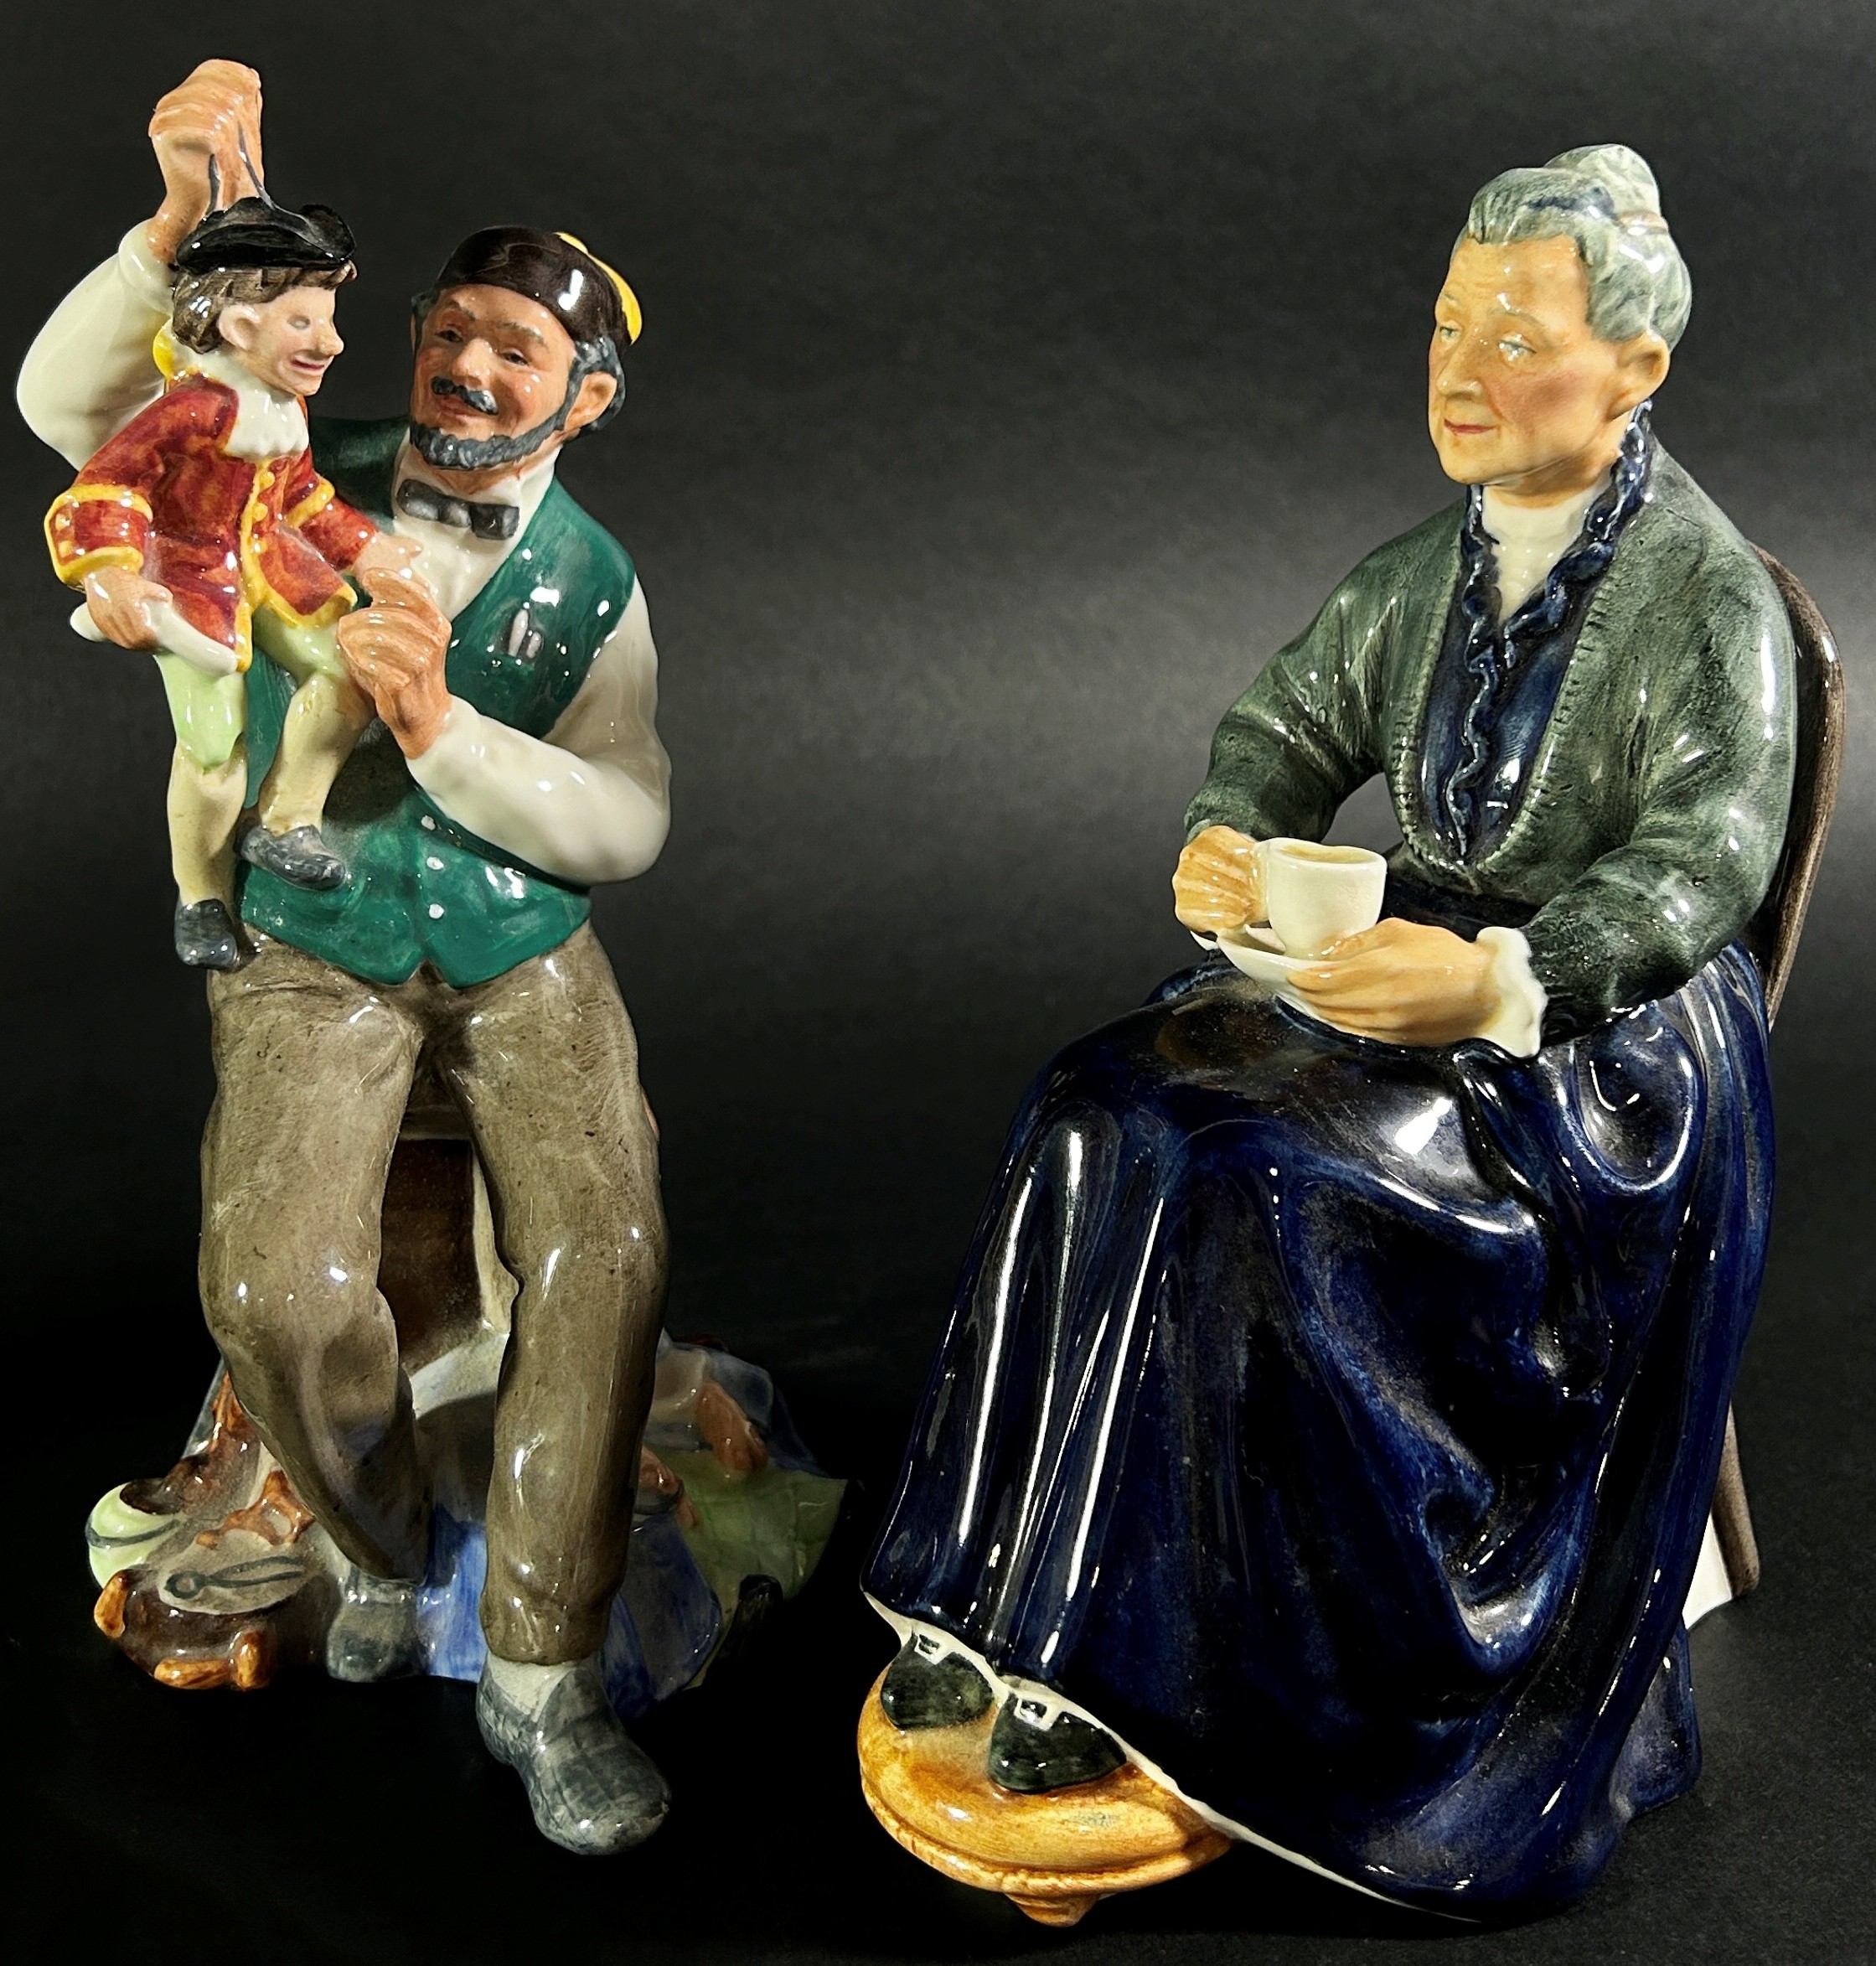 A 19th century German group - female harpist, a Doulton figure - The Puppet Maker, HN2253, The Cup - Image 3 of 3